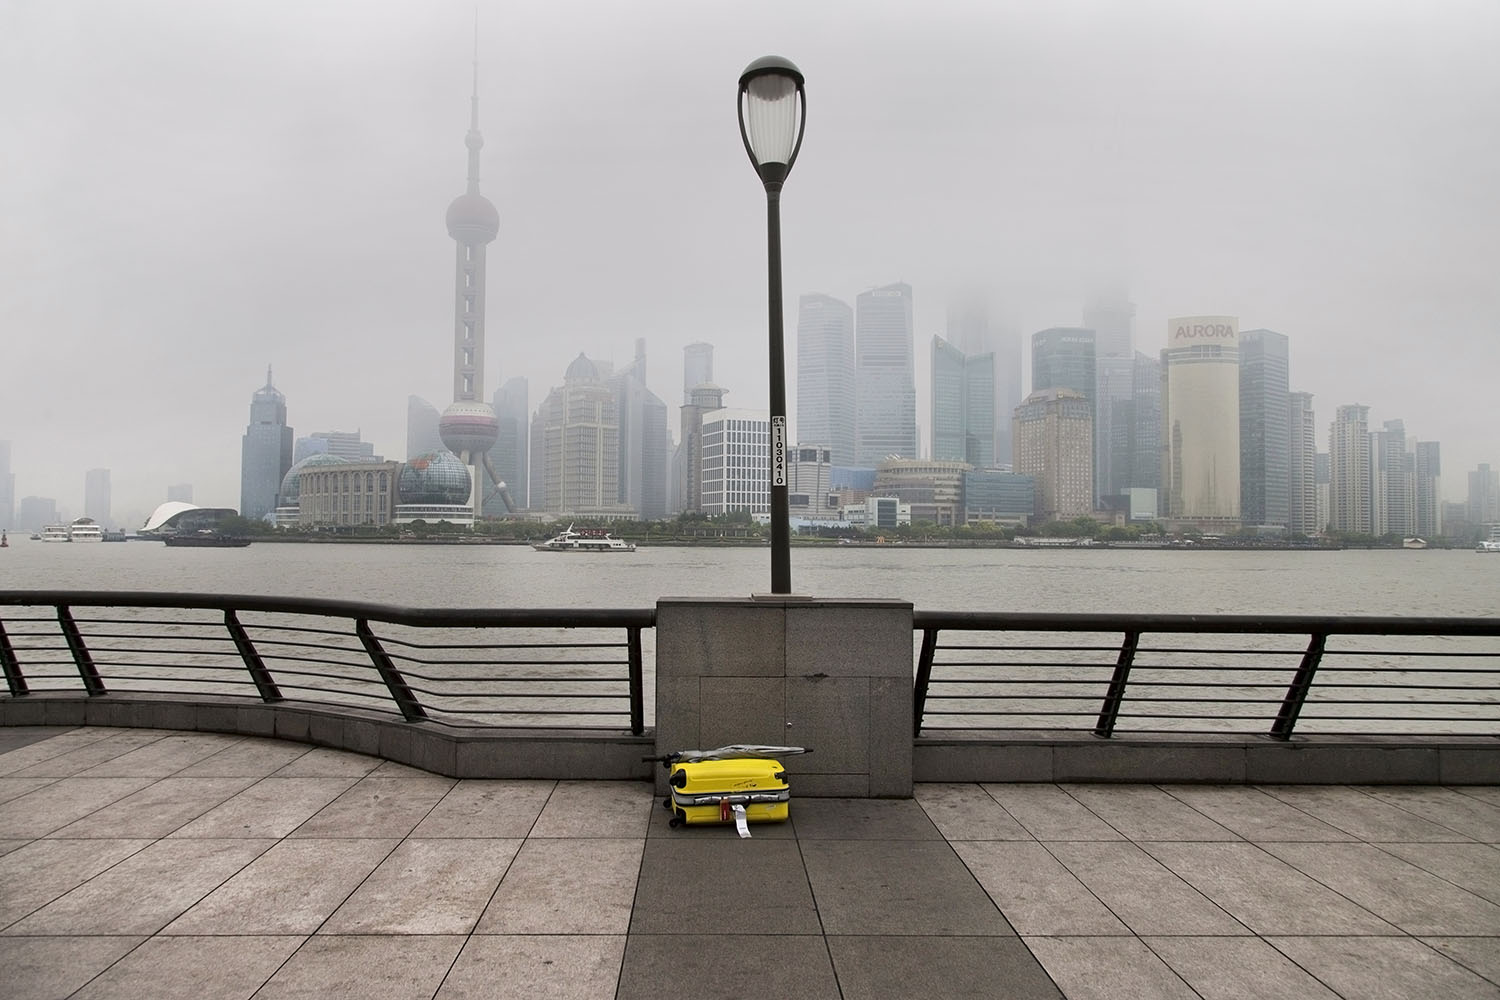 Yellow suitcase and an umbrella on The Bund, with Lujiazui in the background. Shanghai, China. 2013.